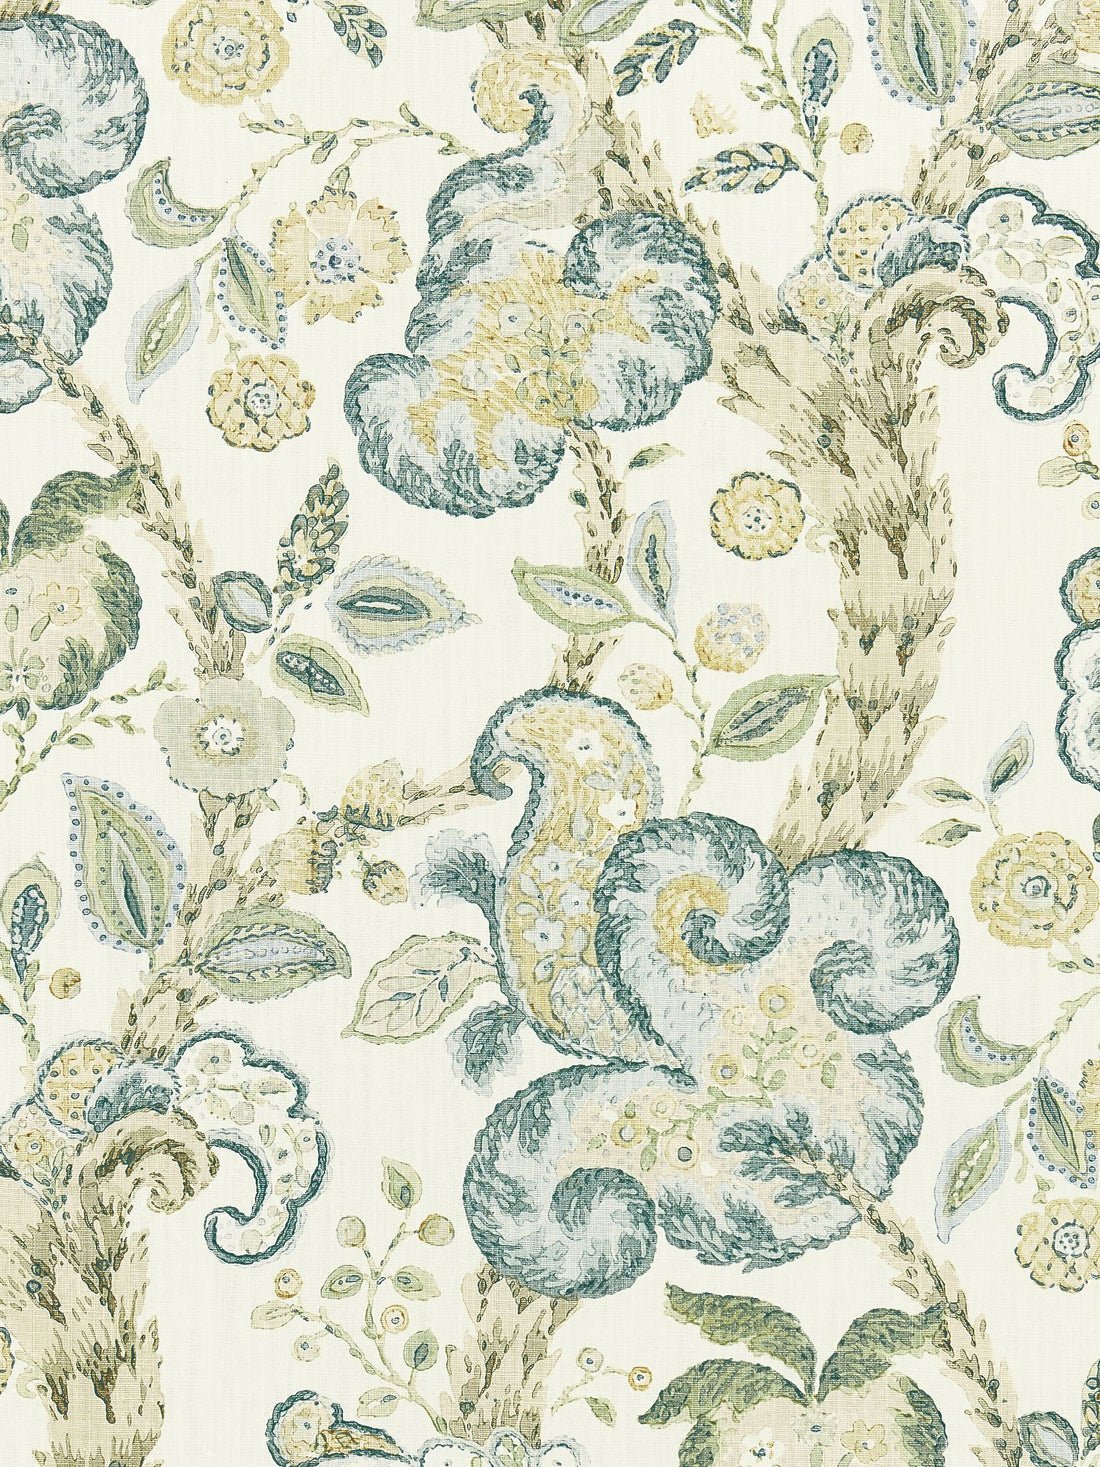 Cumbria Hand Block Print fabric in aquamarine on ivory color - pattern number SC 000116603 - by Scalamandre in the Scalamandre Fabrics Book 1 collection